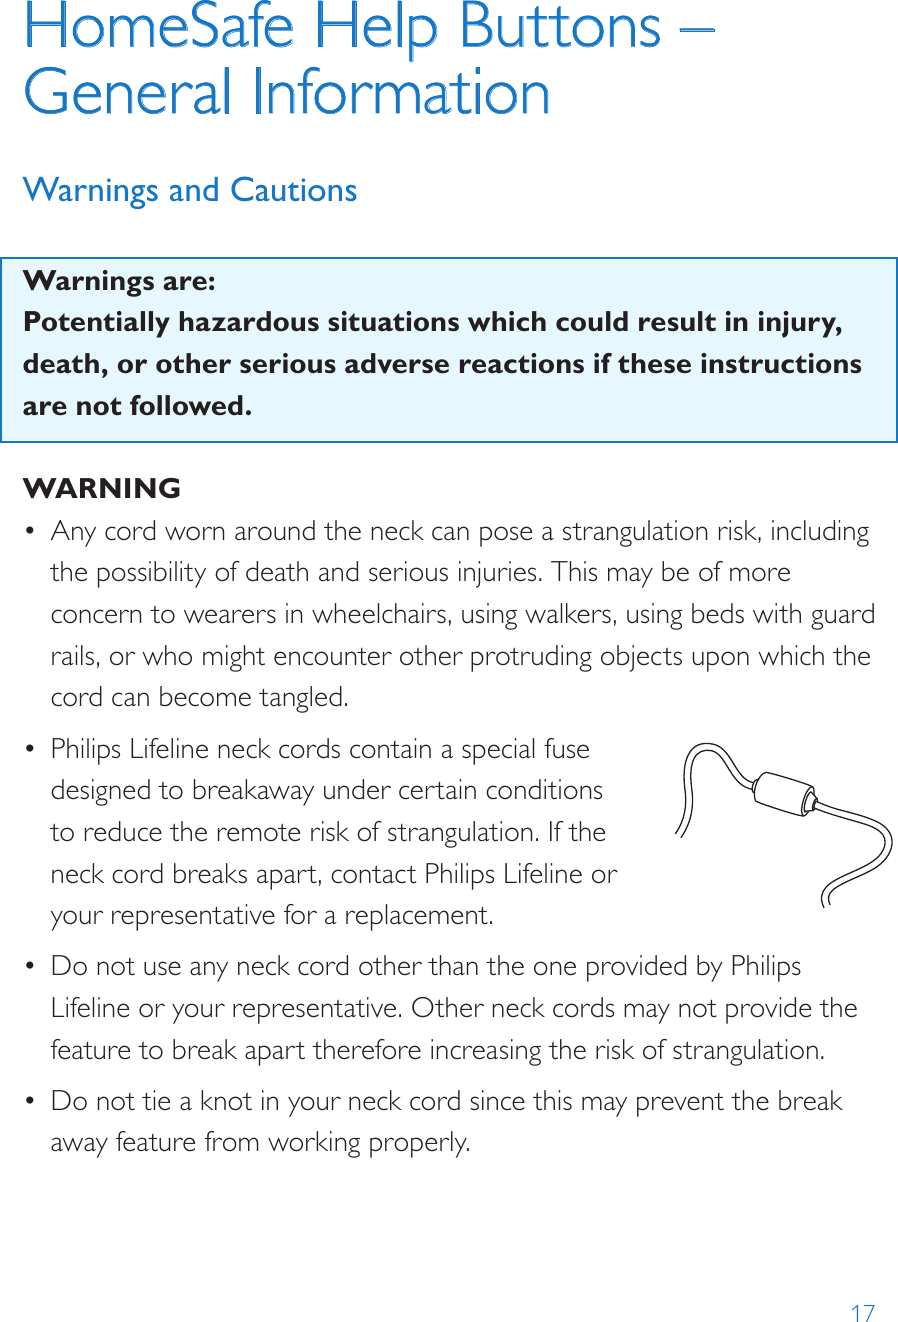 17HomeSafe Help Buttons – General Information Warnings and CautionsWarnings are:Potentially hazardous situations which could result in injury, death, or other serious adverse reactions if these instructions are not followed. WARNING•  Any cord worn around the neck can pose a strangulation risk, including the possibility of death and serious injuries. This may be of more concern to wearers in wheelchairs, using walkers, using beds with guard rails, or who might encounter other protruding objects upon which the cord can become tangled.•  Philips Lifeline neck cords contain a special fuse designed to breakaway under certain conditions to reduce the remote risk of strangulation. If the neck cord breaks apart, contact Philips Lifeline or your representative for a replacement.•  Do not use any neck cord other than the one provided by Philips Lifeline or your representative. Other neck cords may not provide the feature to break apart therefore increasing the risk of strangulation.•  Do not tie a knot in your neck cord since this may prevent the break away feature from working properly.8235Model: 7000PHB2000148235-YYYYMMDDFCC: BDZ700 0PHBIC: 655C -7000P HB82352000148235-YYYYMMDDFCC: BDZ700 0AHBIC: 655C -7000A HBModel: 7000AHB82352000148235-YYYYMMDDFCC: BDZ7000AHBIC: 655C-7000AHBModel: 7000AHB